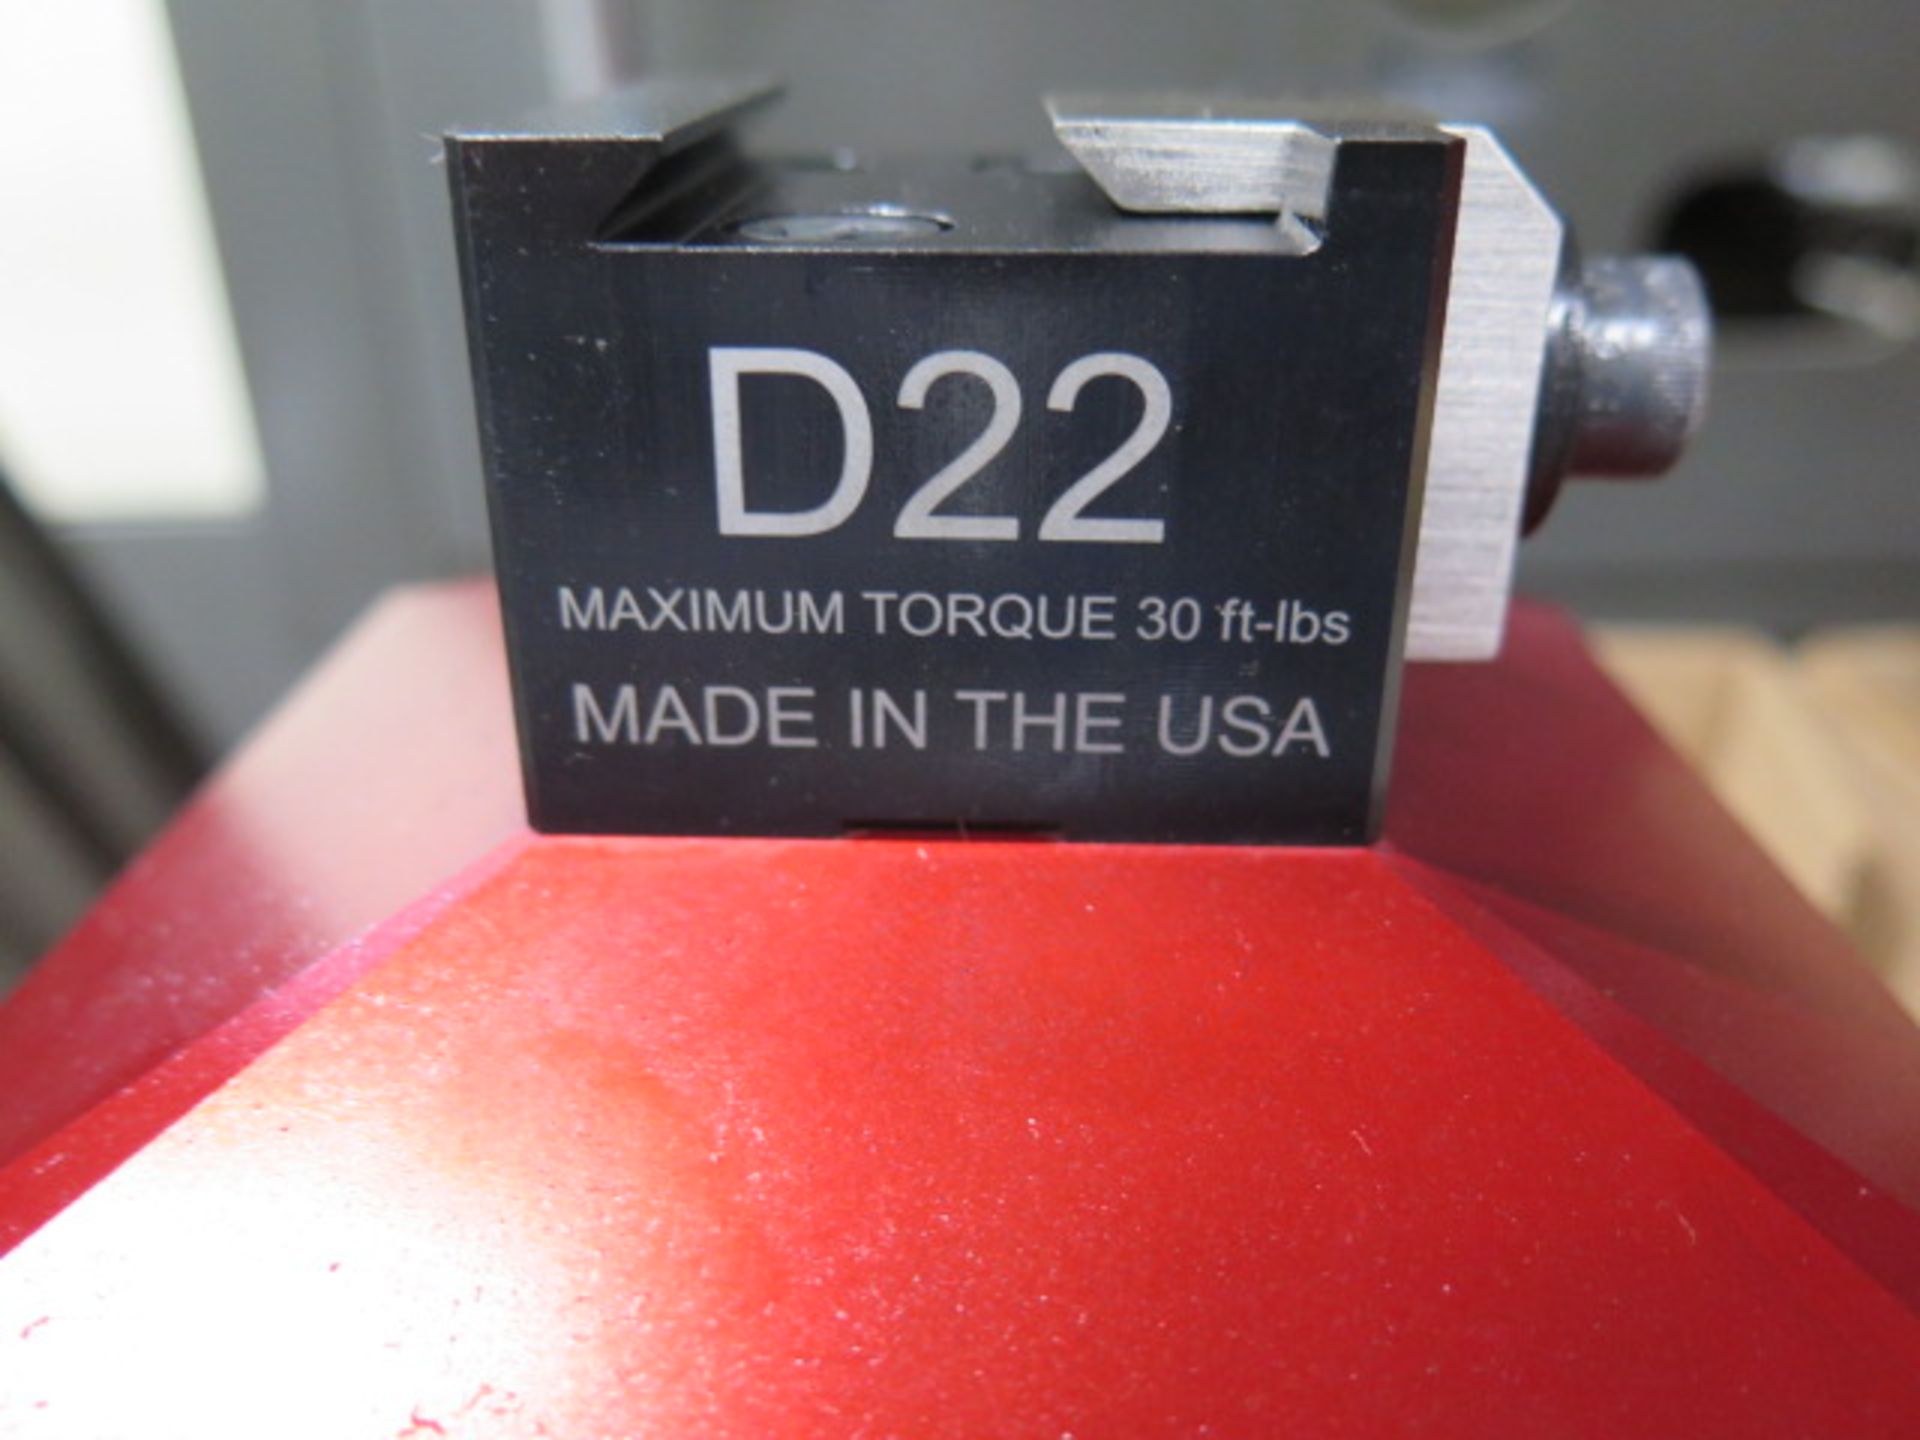 5th Axis mdl. R96-D22 Quick Change 2" Vise (SOLD AS-IS - NO WARRANTY) - Image 6 of 6